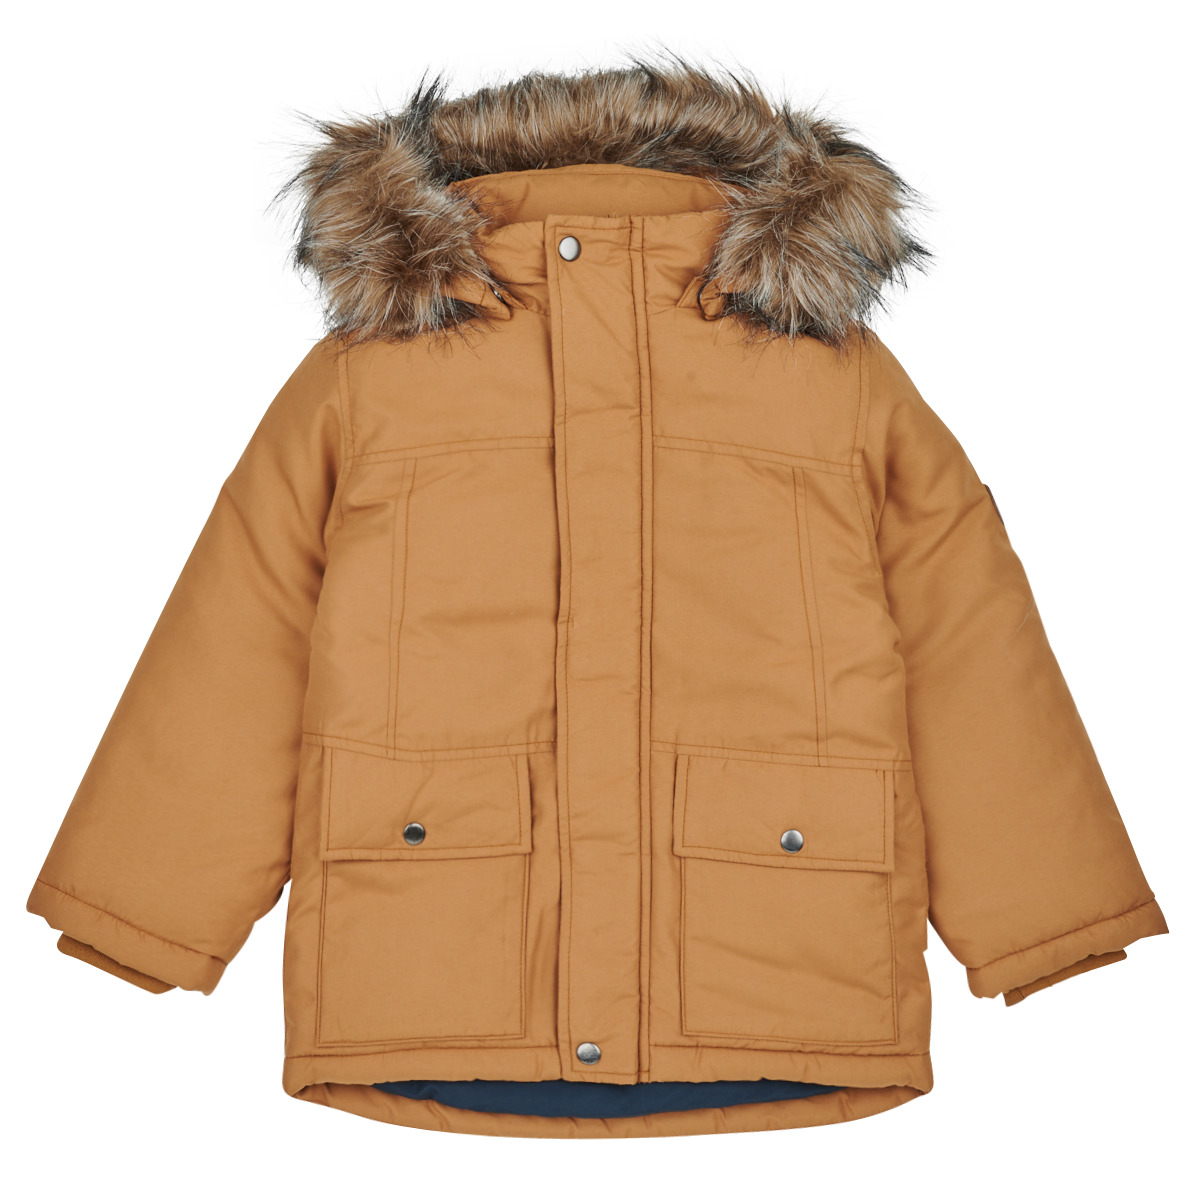 Name it NKMMARLIN PARKA JACKET SOUTH Camel NET delivery ! PB Parkas - - Spartoo Clothing Free Child 